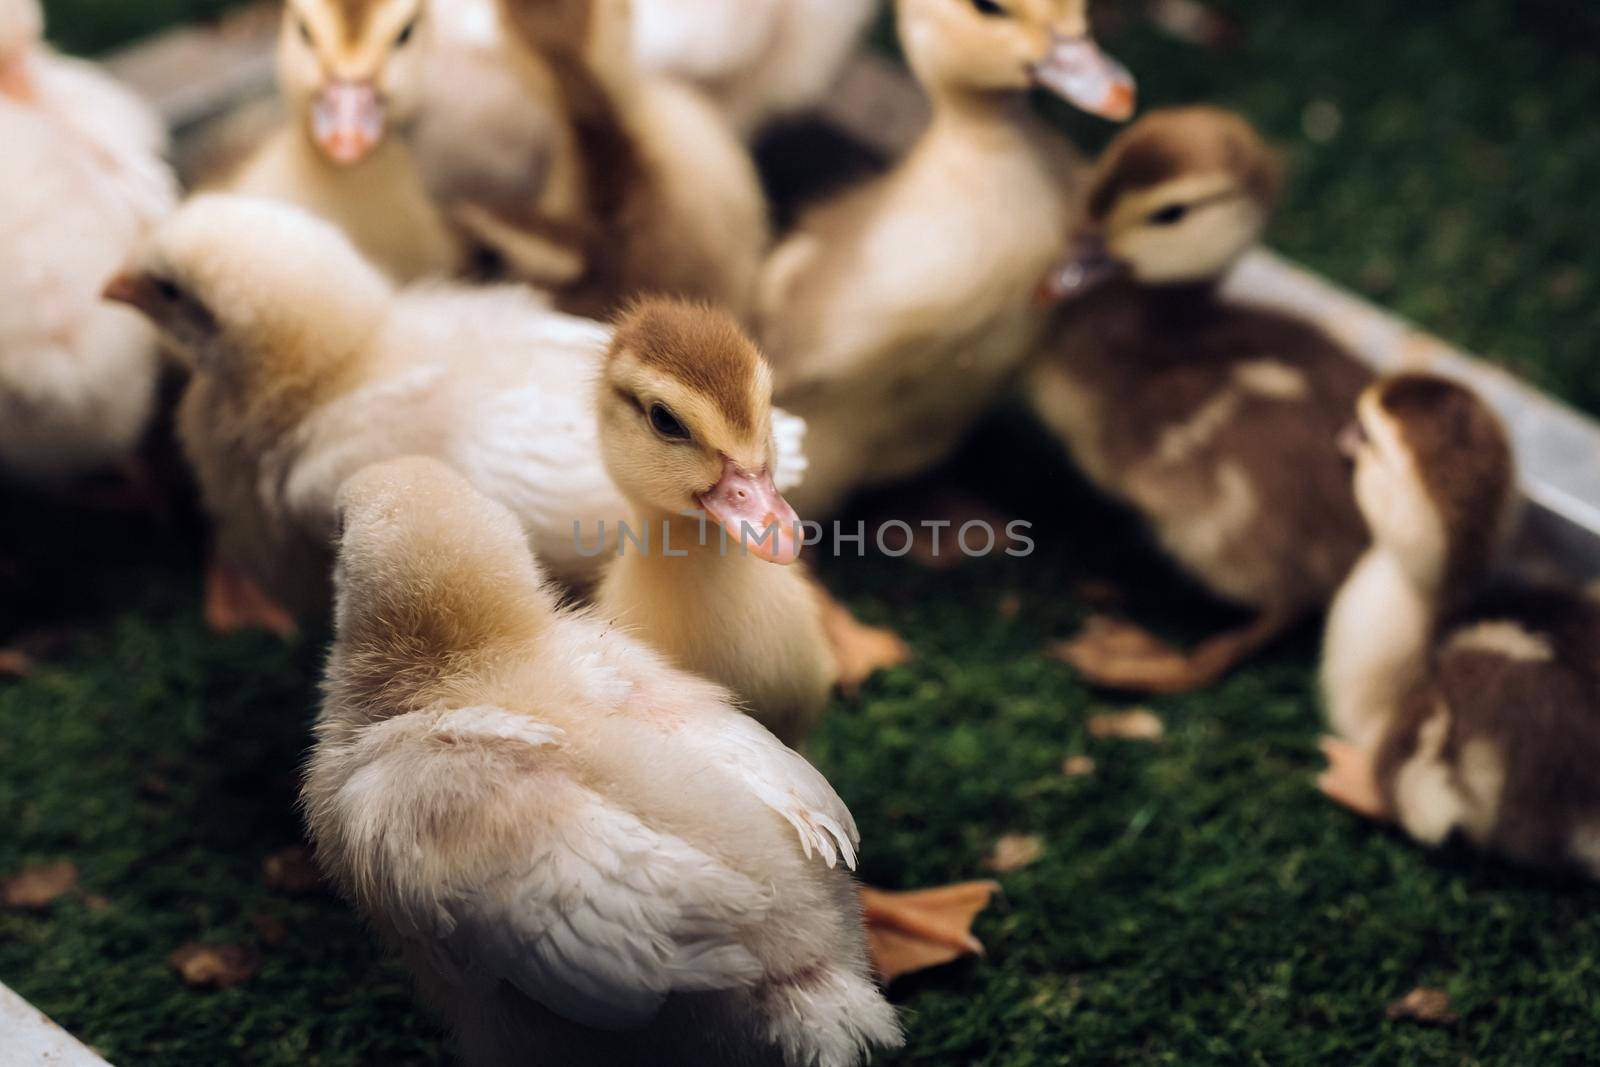 Little chickens and ducklings bask in the sun on the grass by Lobachad